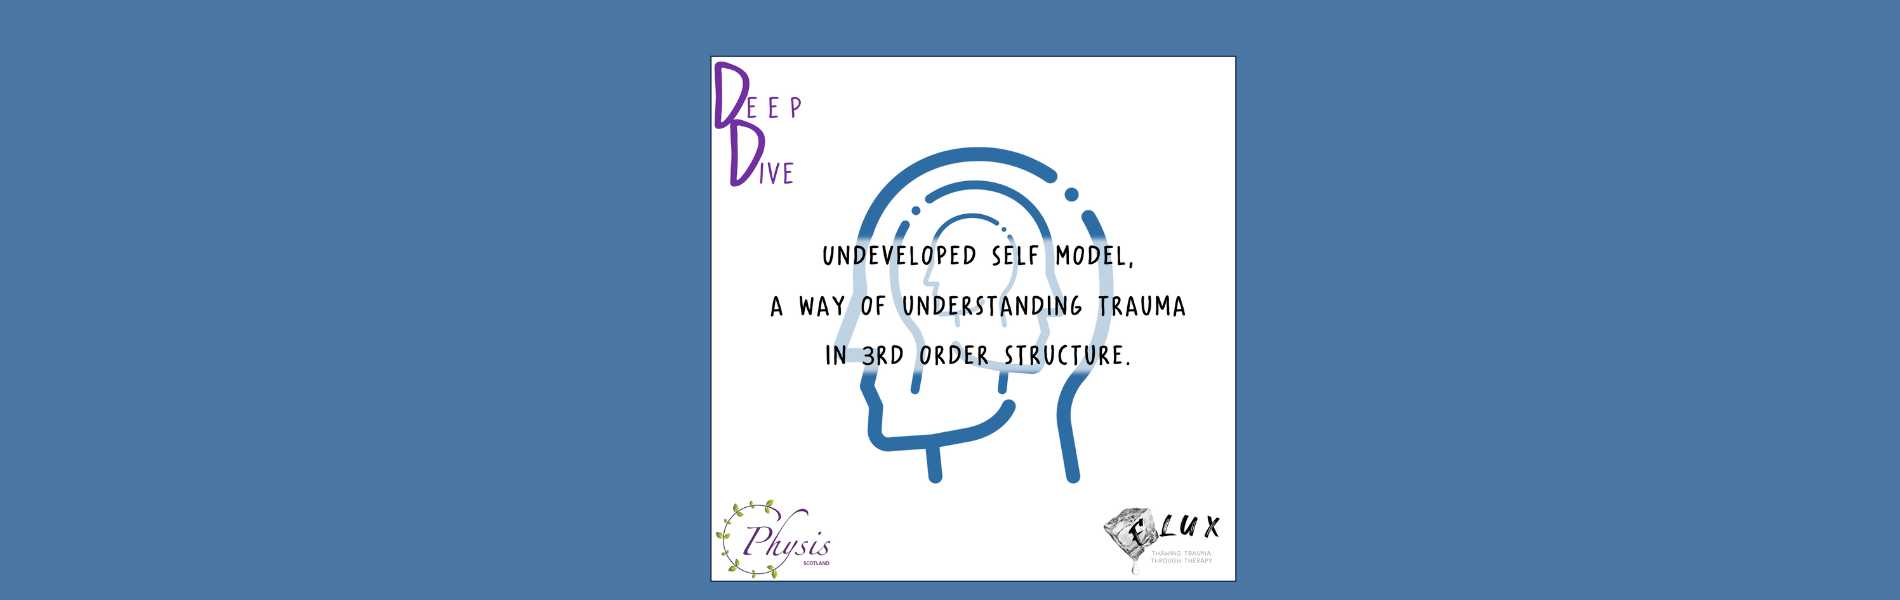 Undeveloped Self Model, a way of Understanding Trauma in 3rd Order Structure